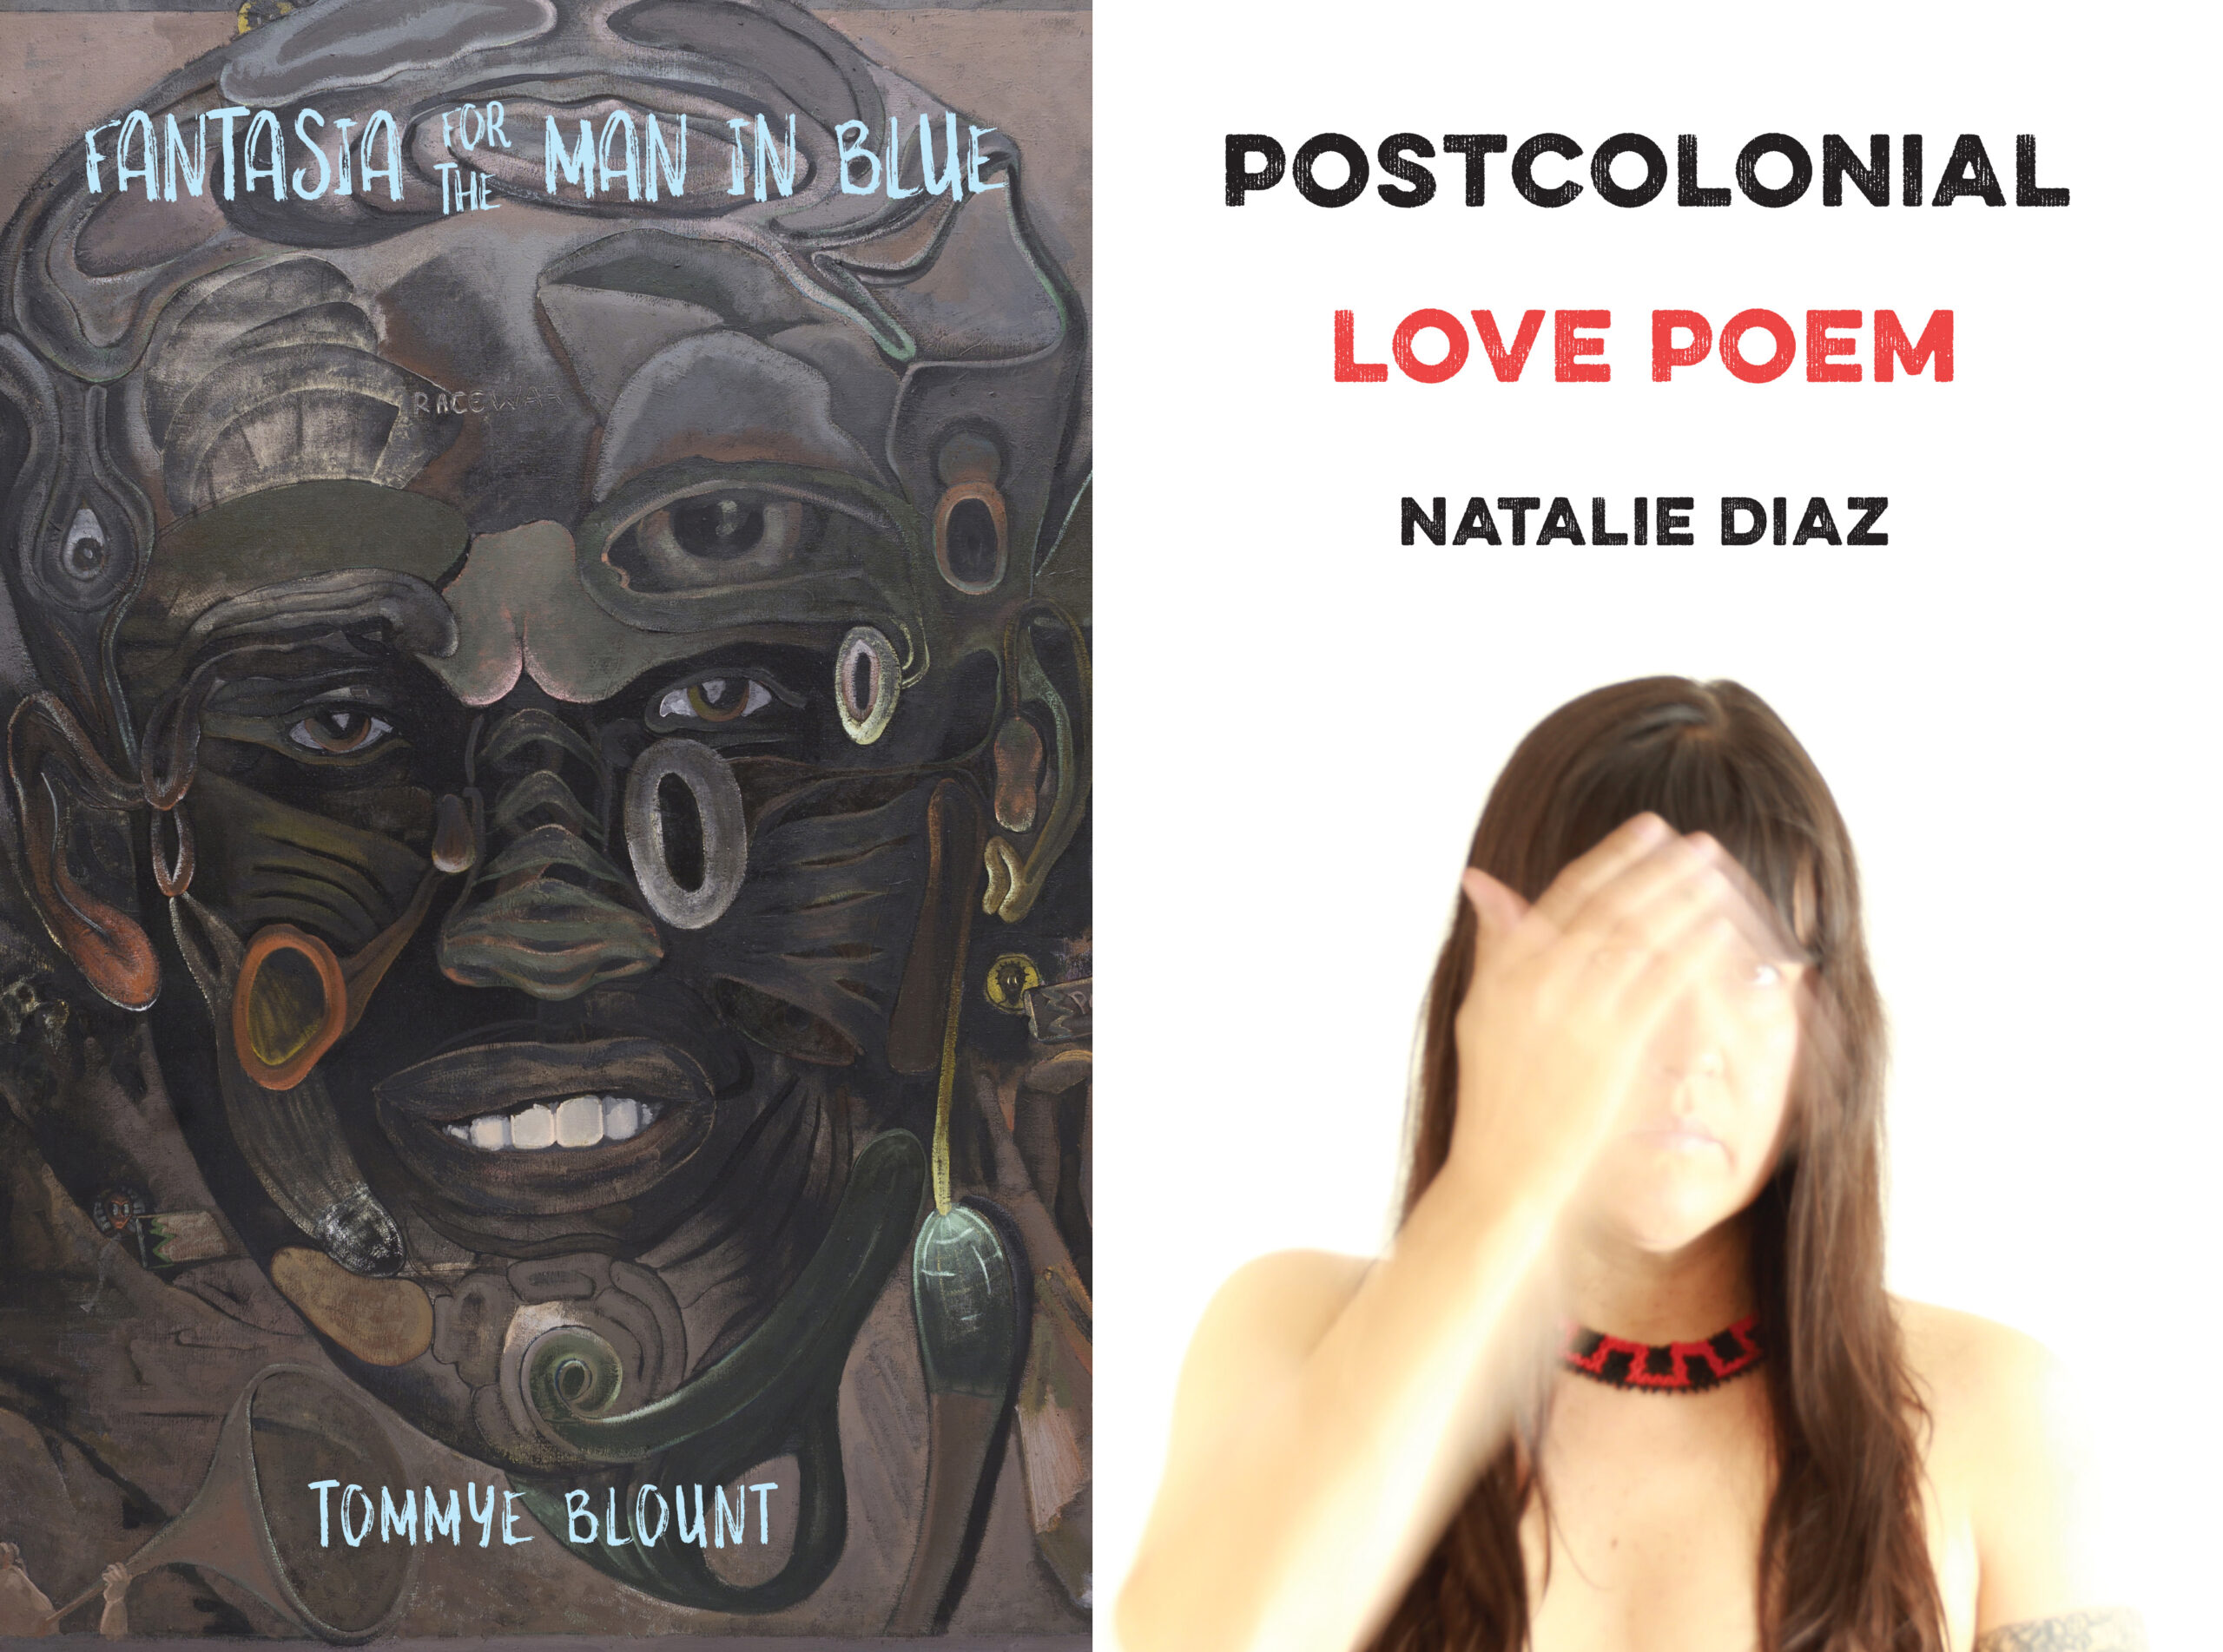 LitFest 2021: Poems by Tommye Blount and Natalie Diaz